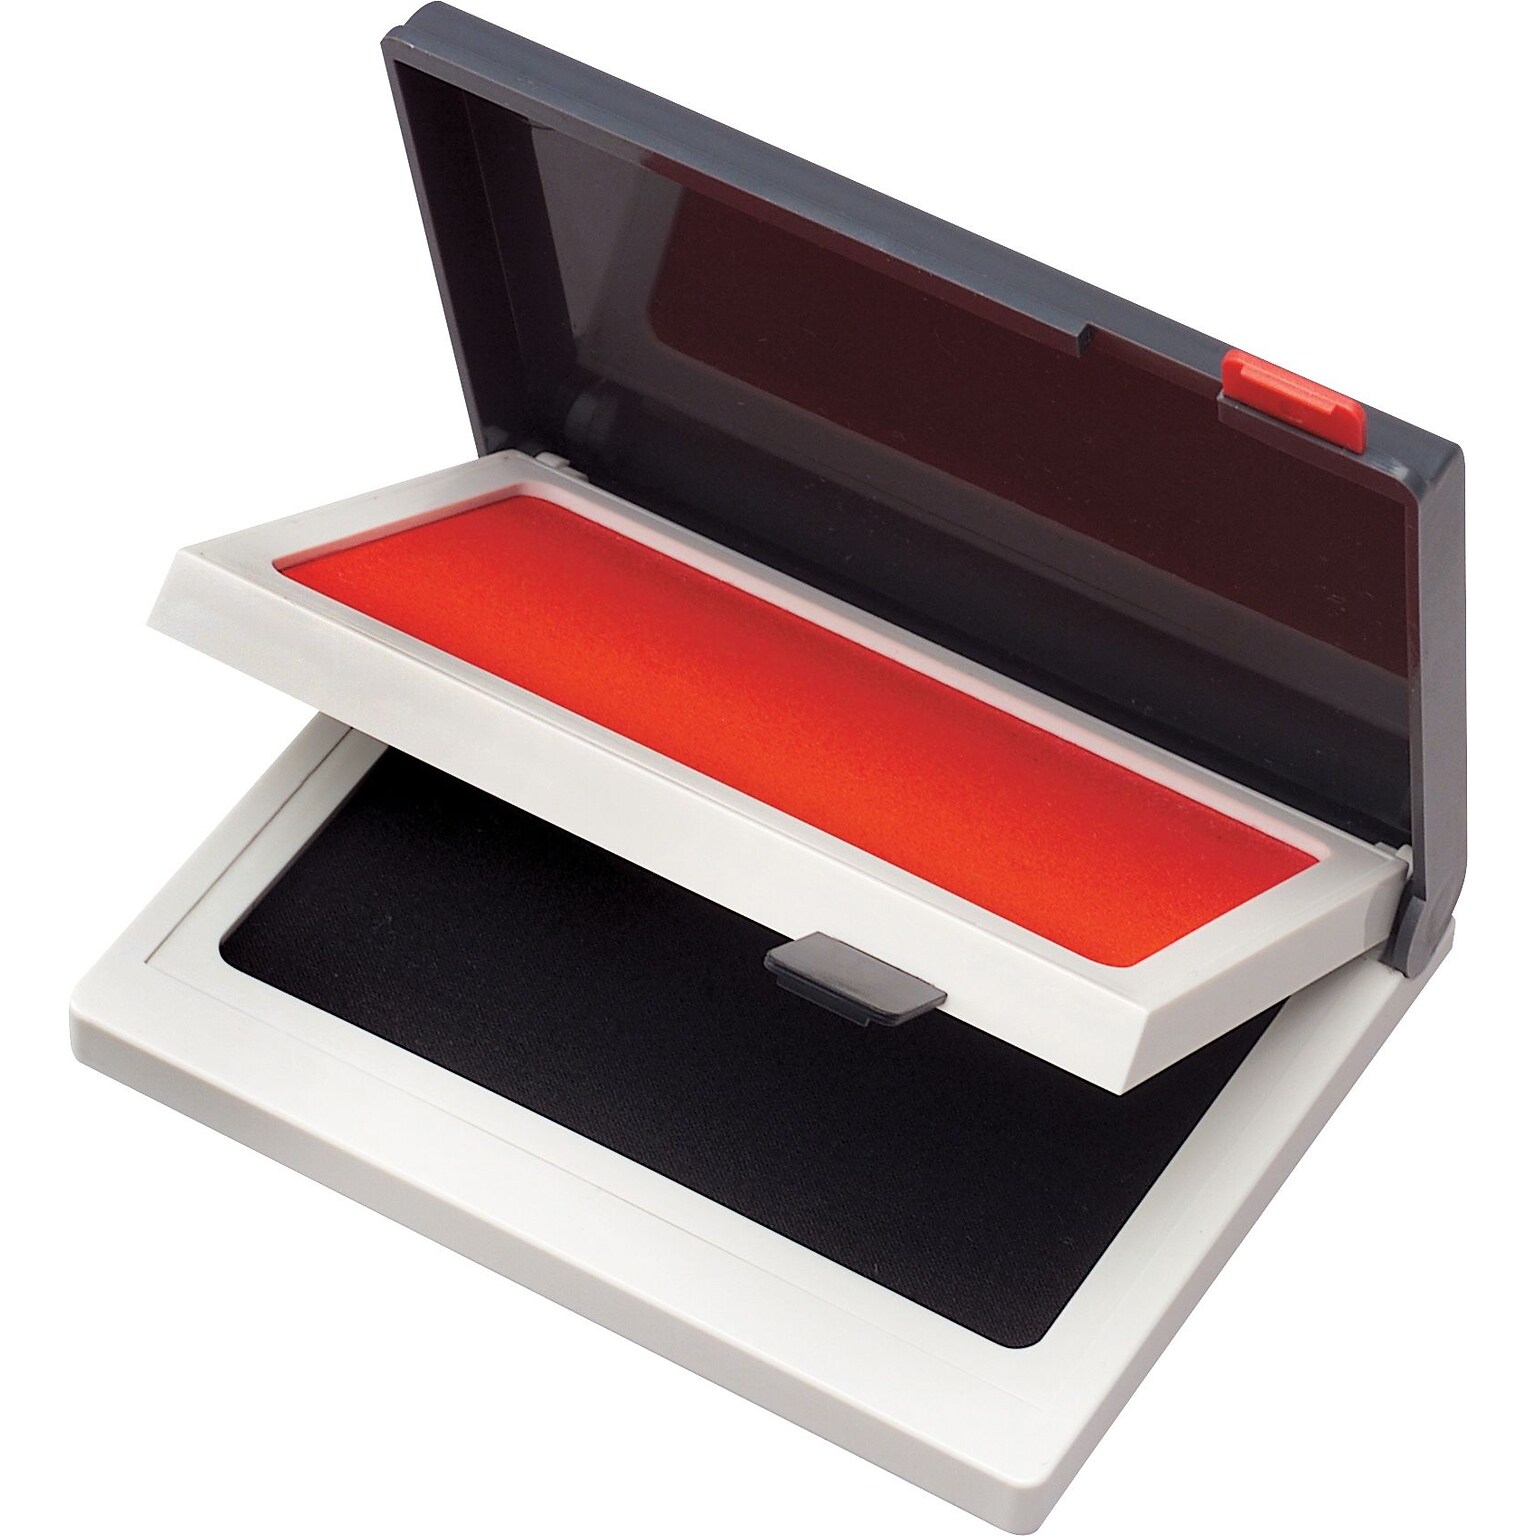 Cosco Two-Color Felt Stamp Pads, Red/Black Ink (090468)